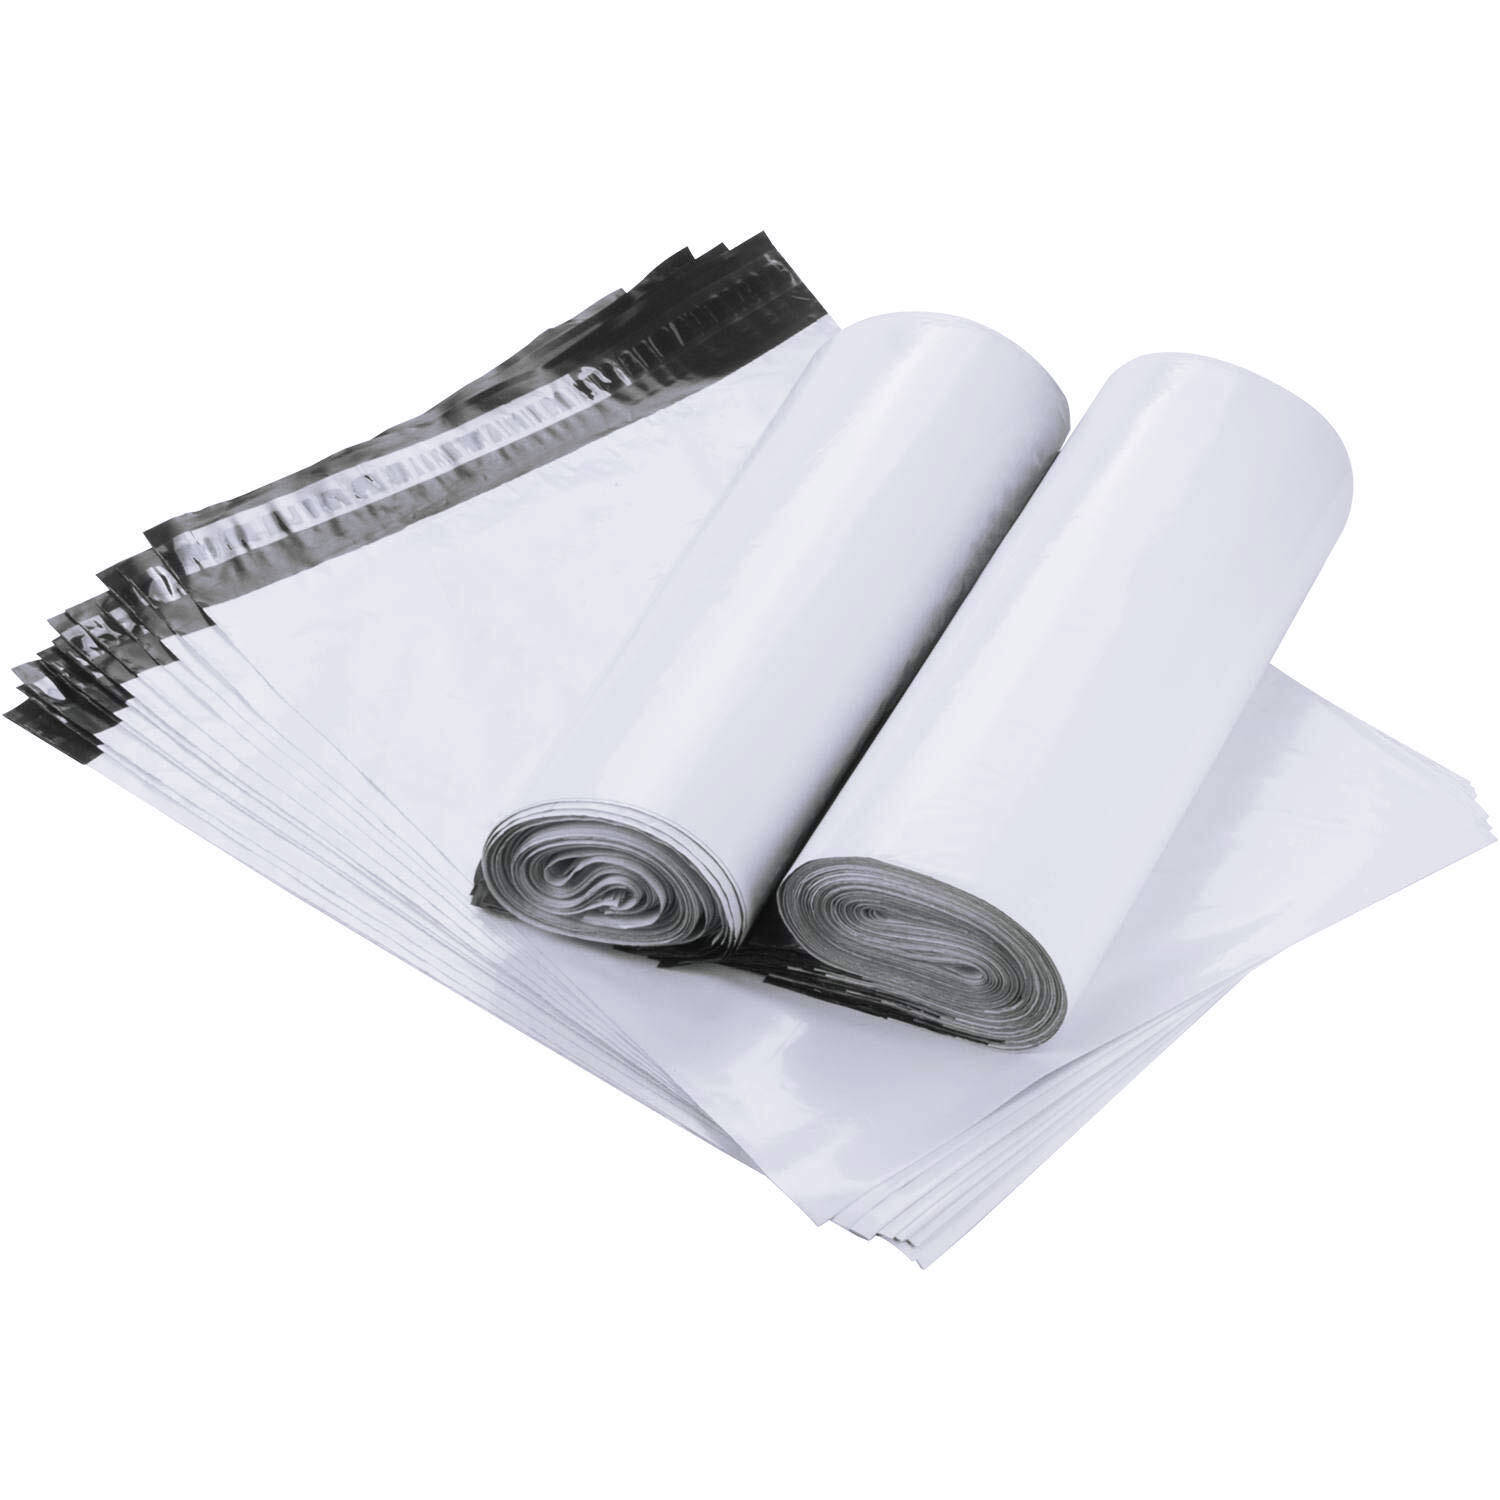 100 X Poly Mailers Envelopes Shipping Bags (40cm x 55cm)